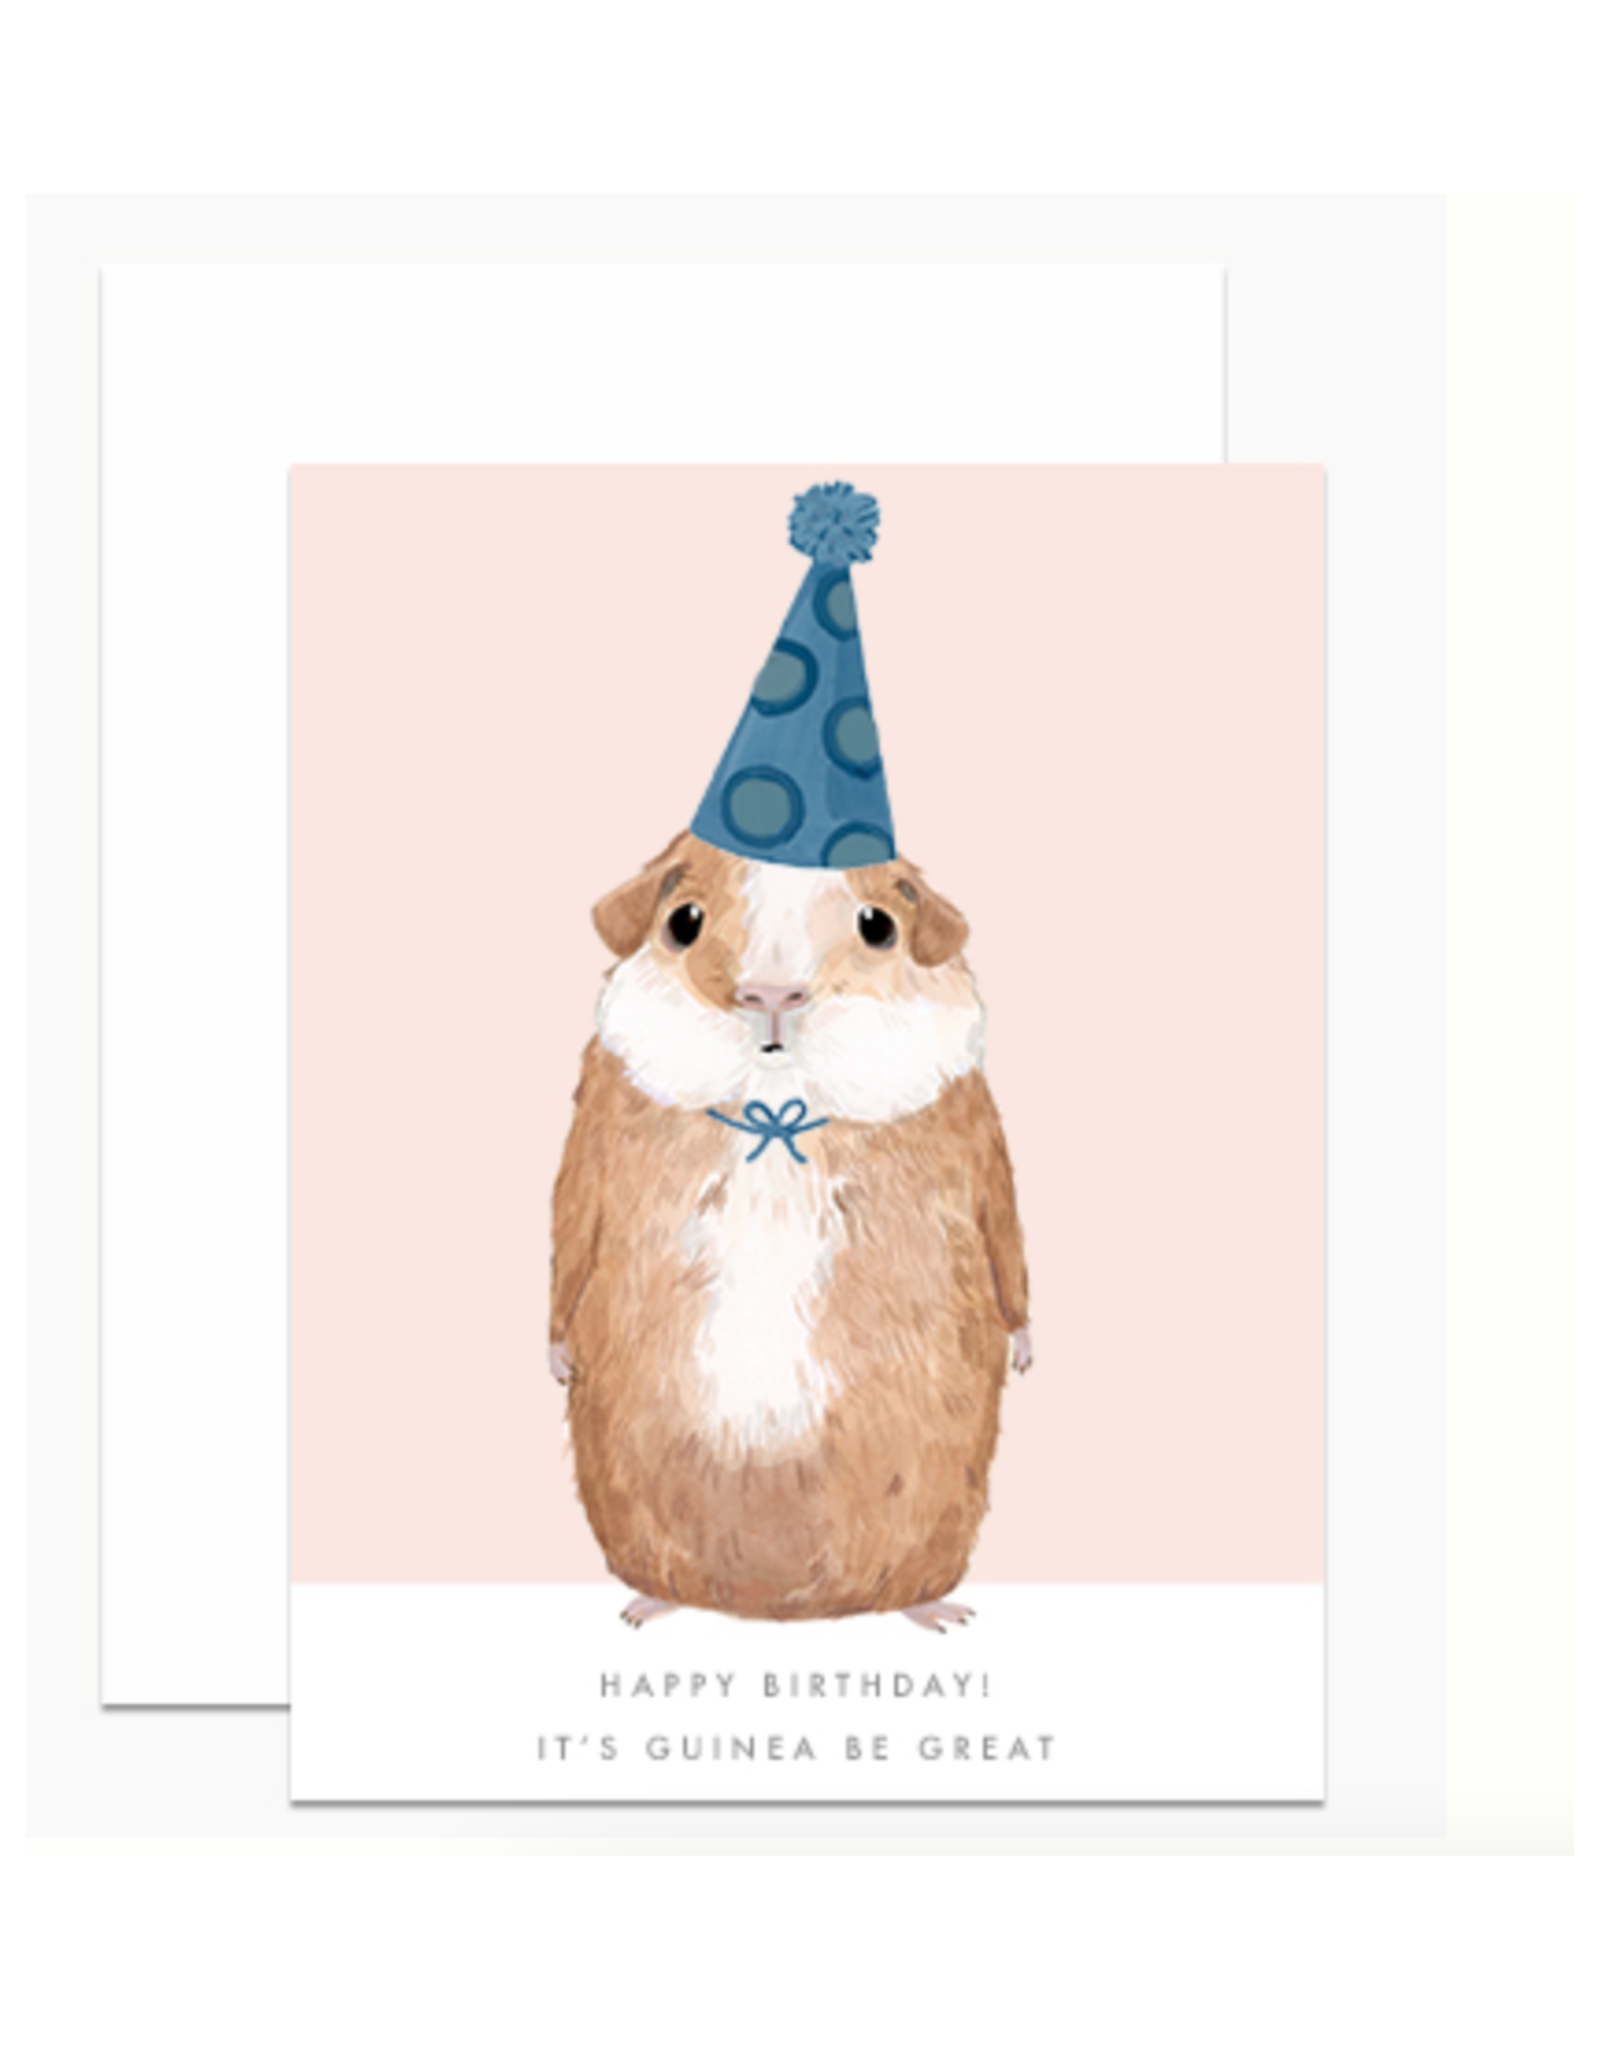 Guinea Be Great Birthday Greeting Card